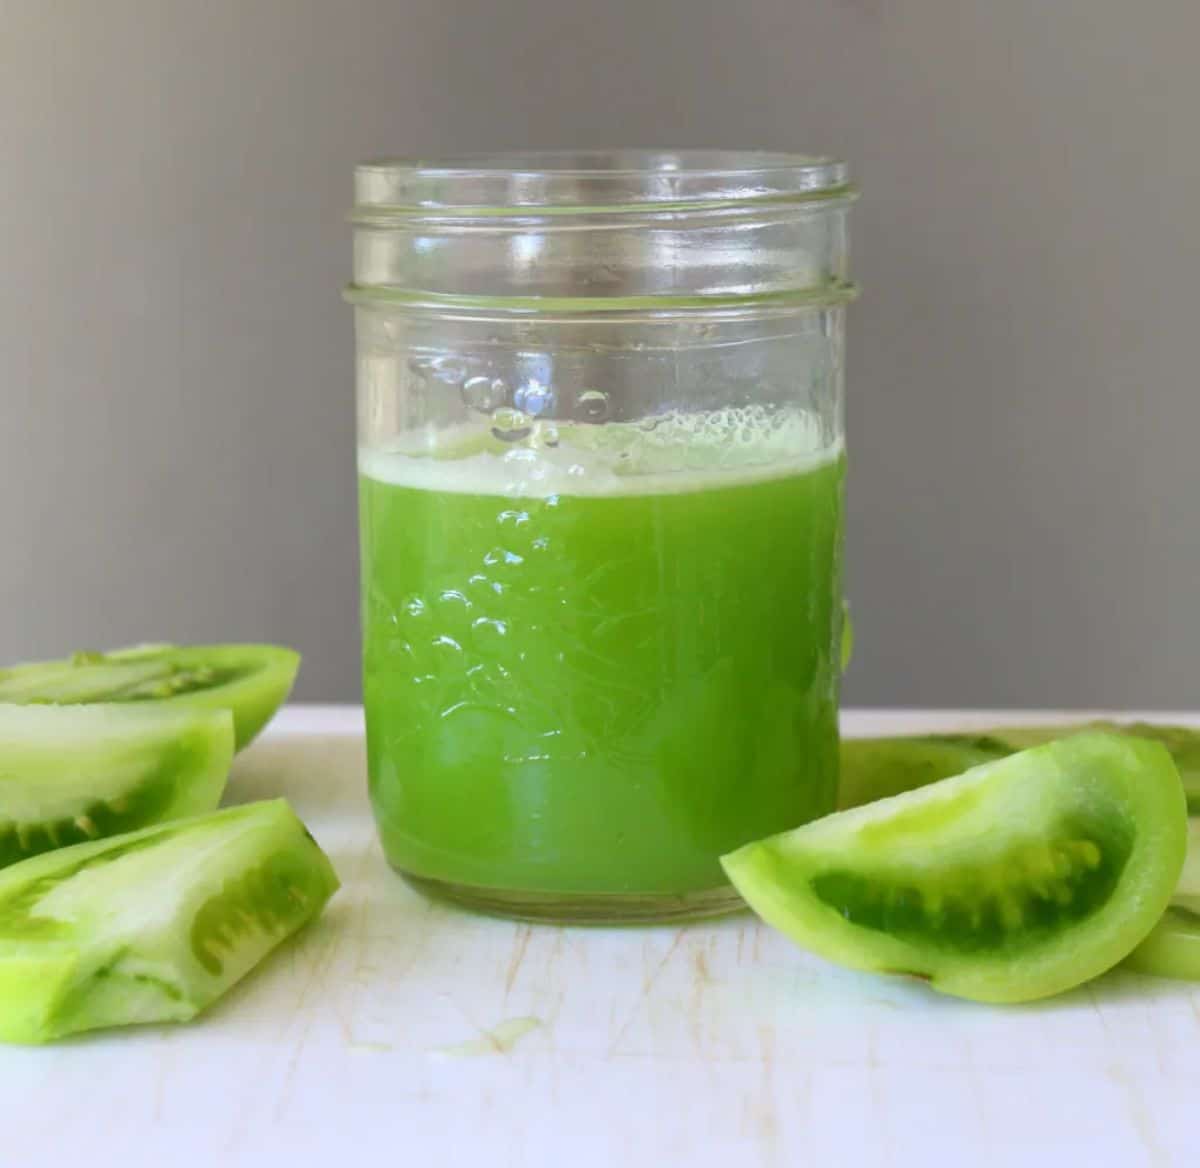 Green tomato juice in a glass jar.